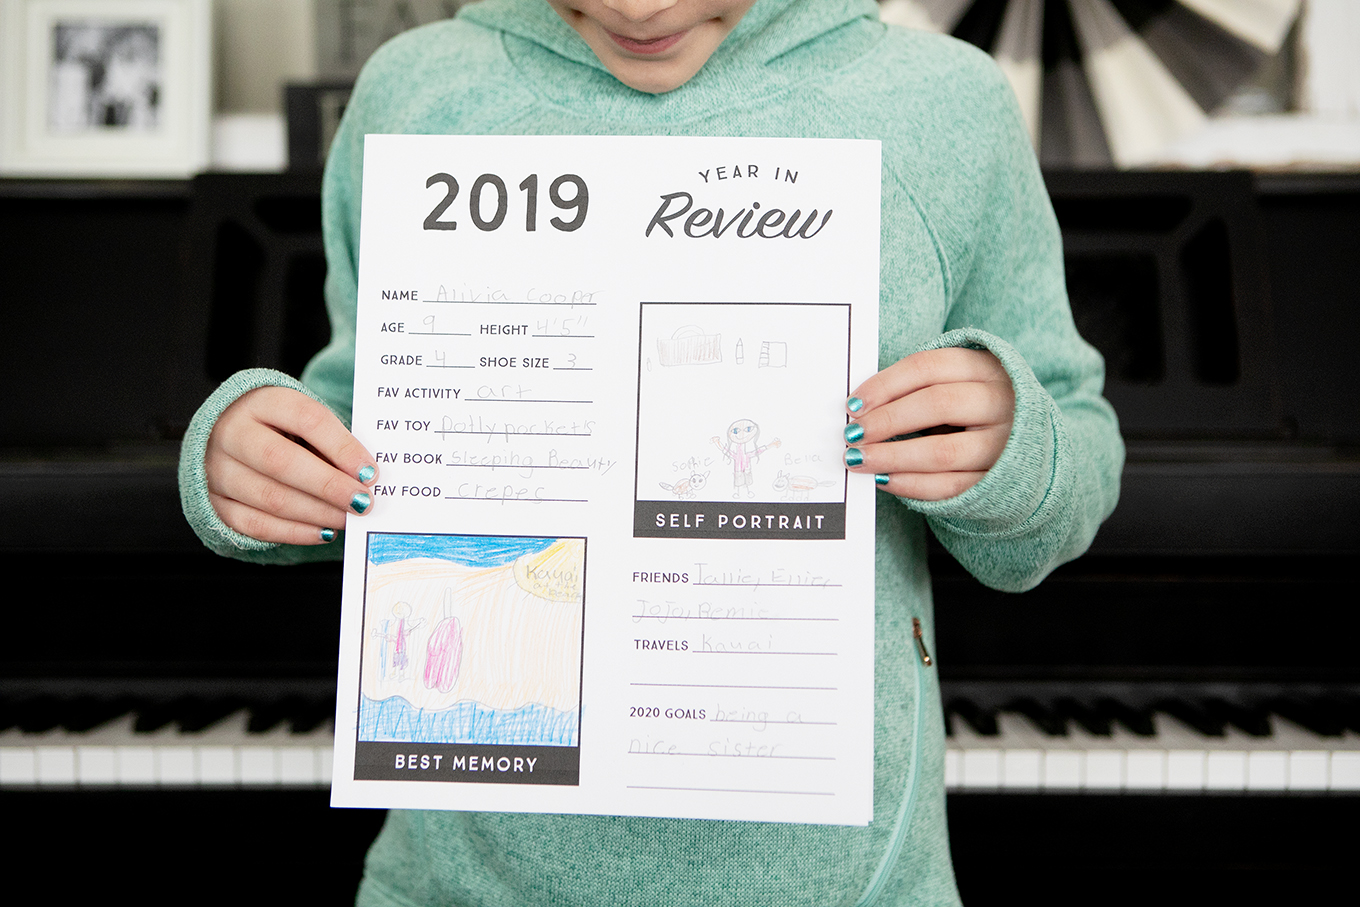 Year in Review Printable for Kids – this free printable year in review sheet gives children a chance to reflect on their favorite memories from the past 12 months and look ahead to new goals and adventures in the coming year!